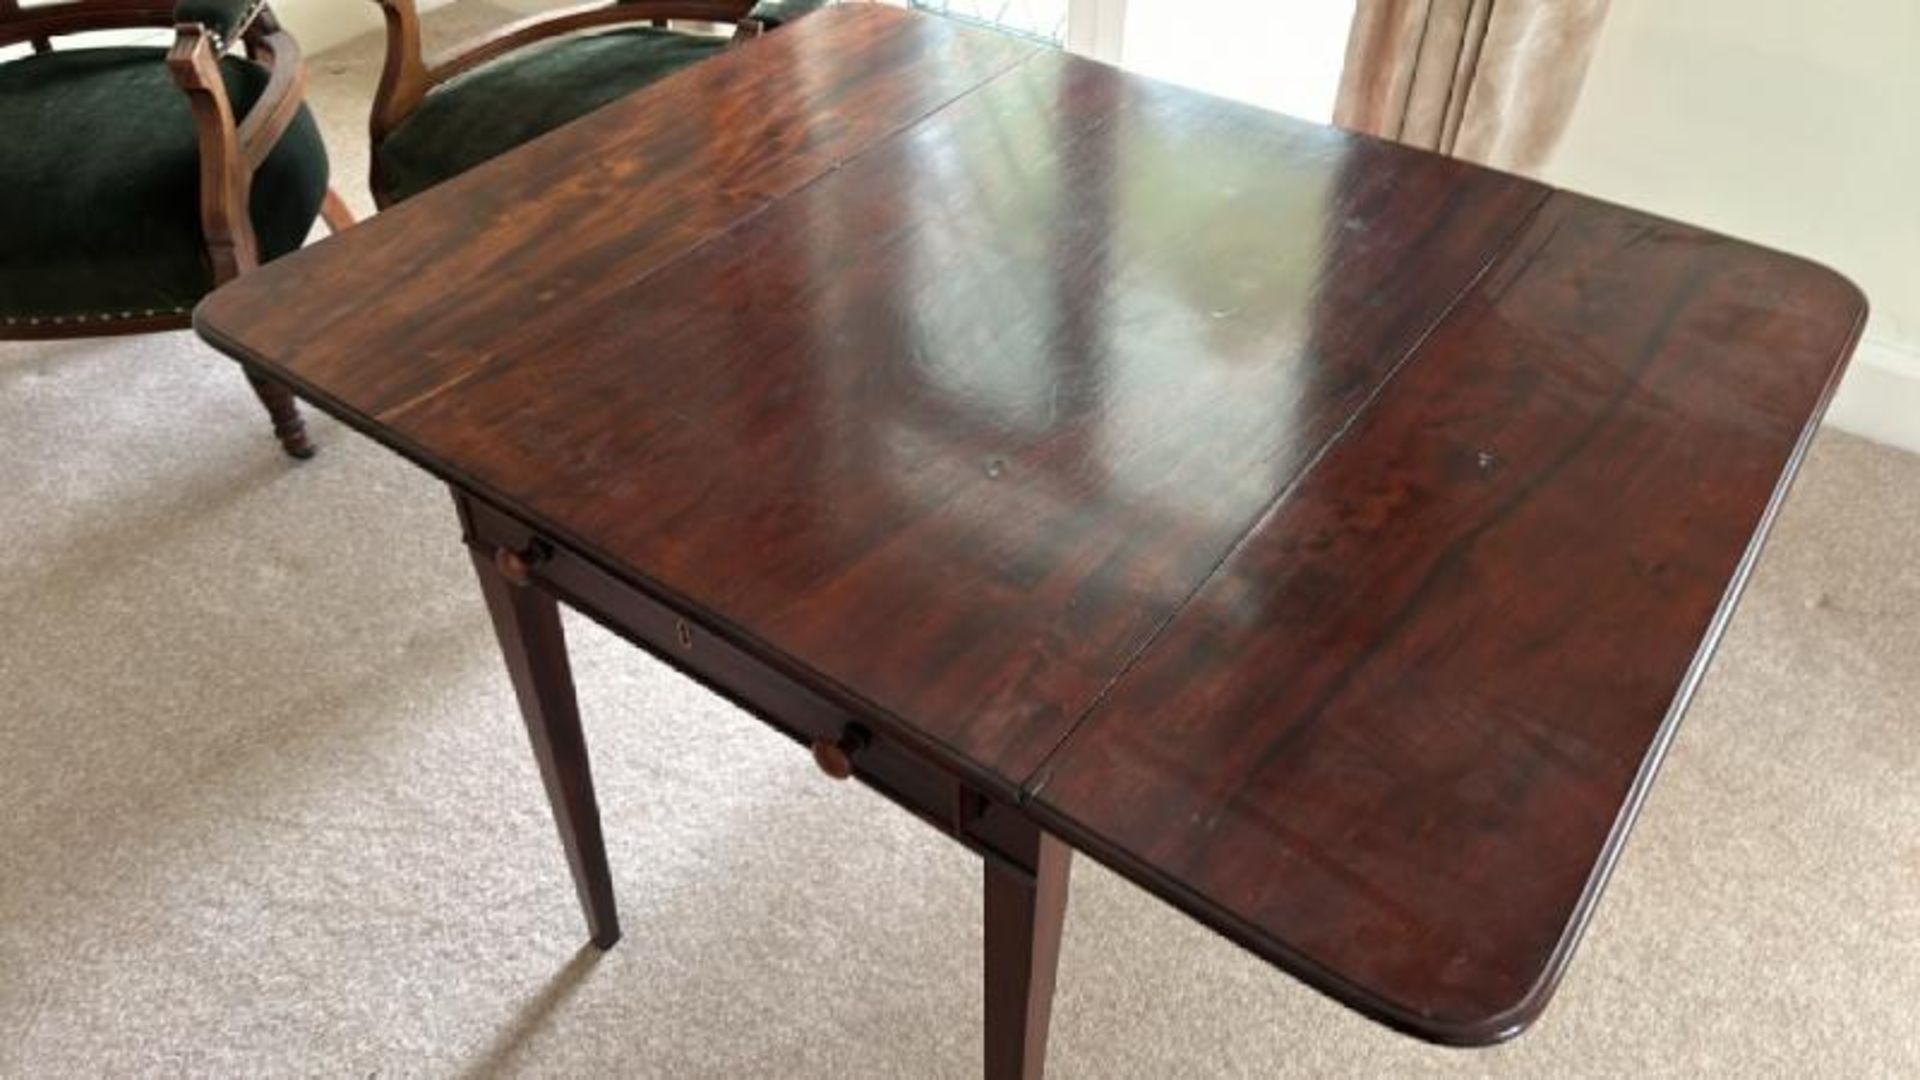 Mahogany fold out table, 102 x 81 x 64 (open) (collection from private residence in Weybridge, - Image 2 of 5